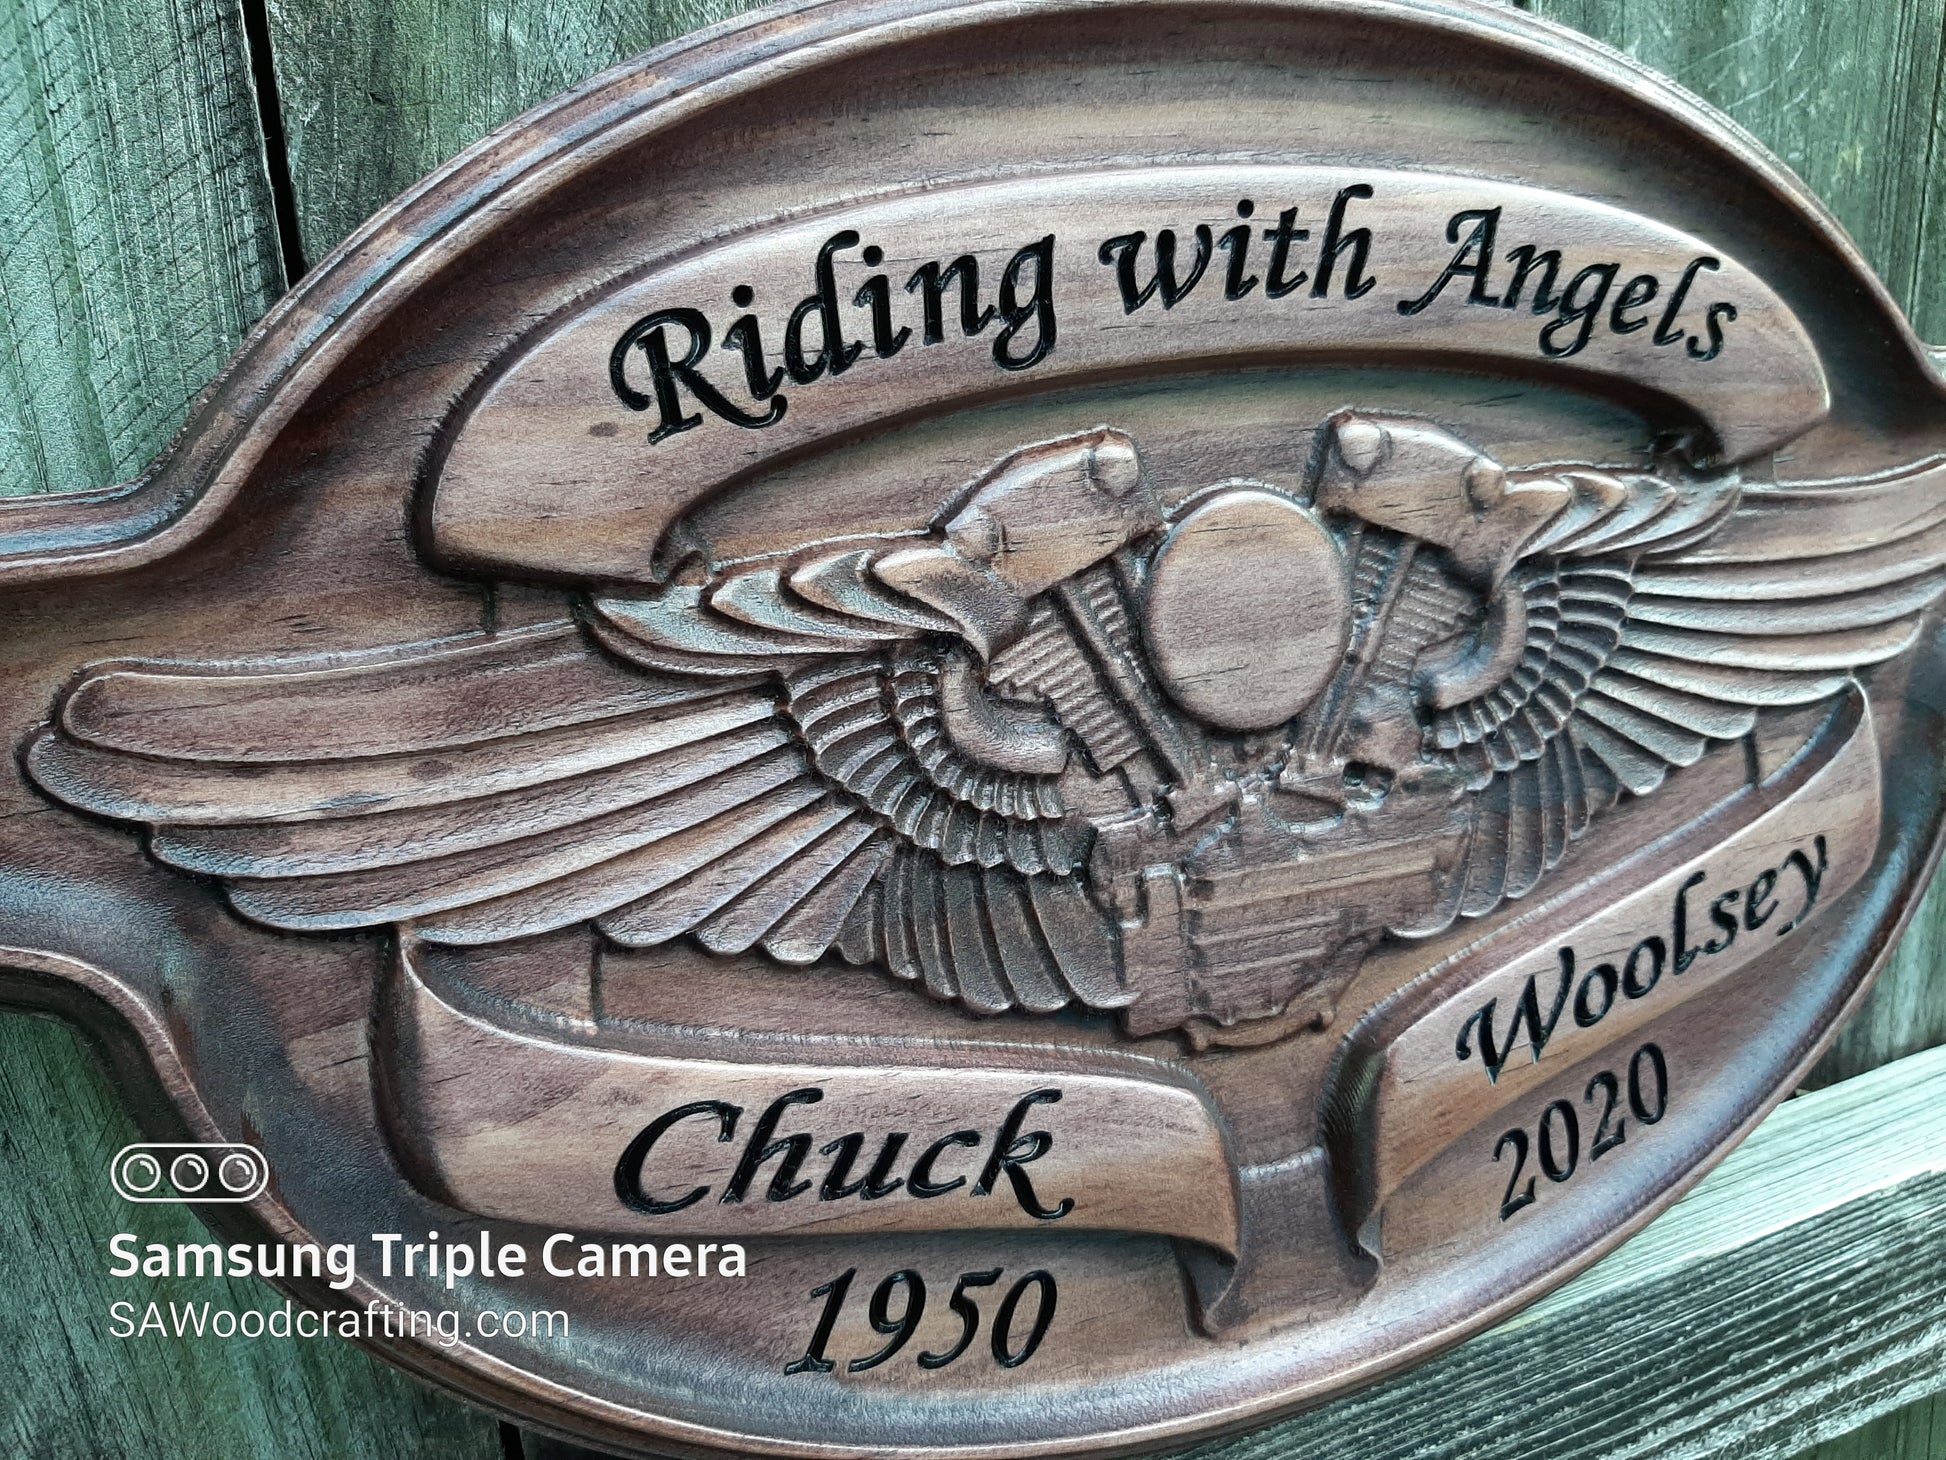 Unique high quality 3D wood carved wood engraved Harley Davidson Memorial Name plaque made in the USA.